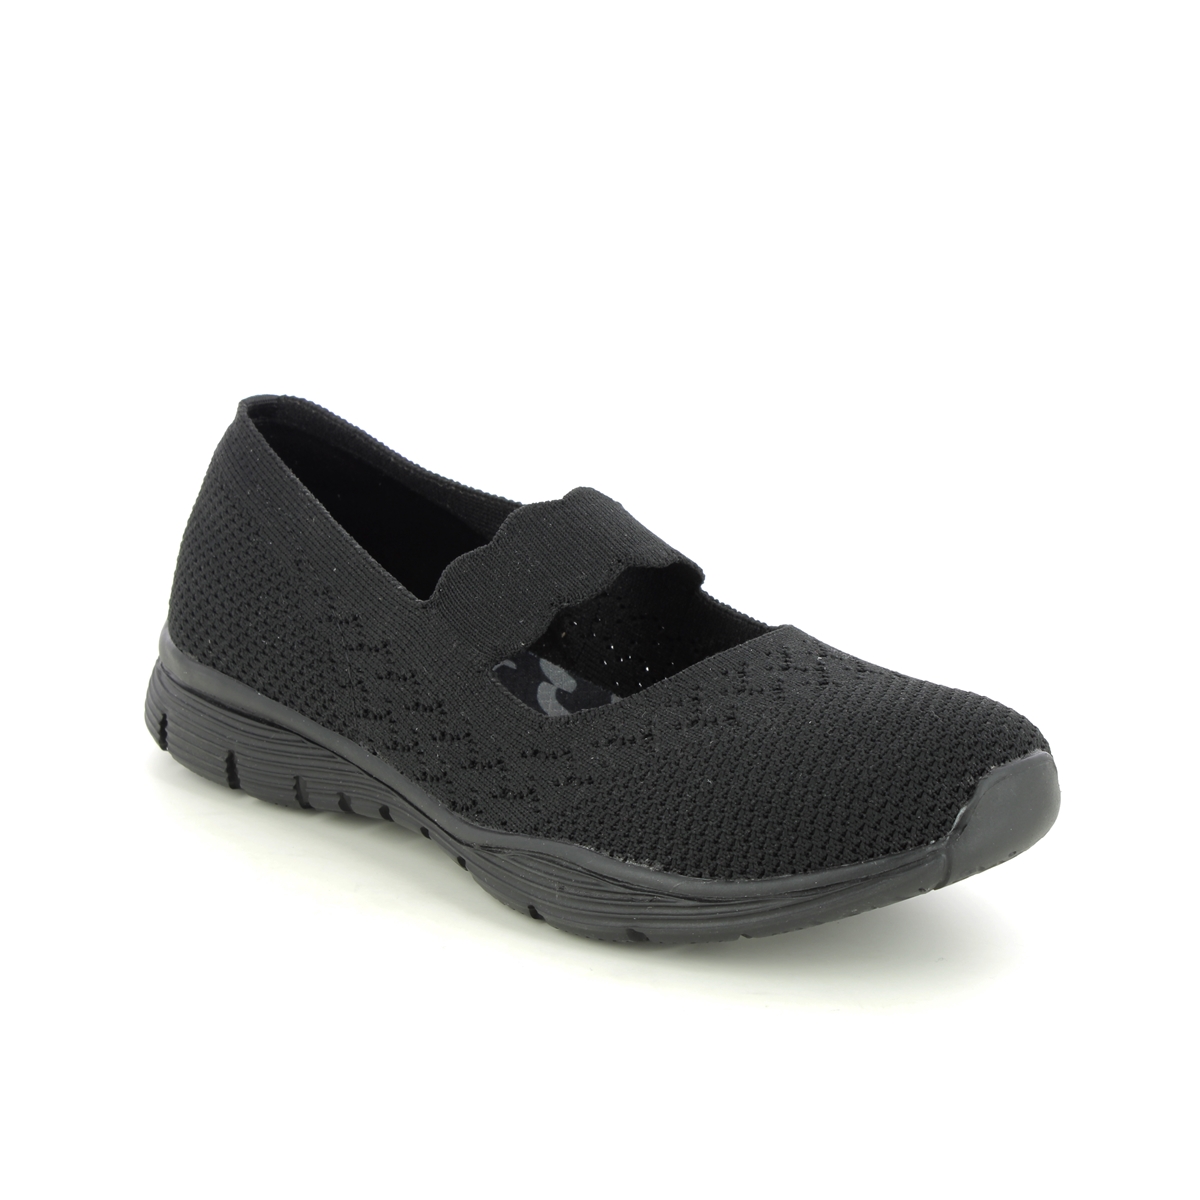 Skechers Seager Power BBK Black Womens Mary Jane Shoes 49622 in a Plain Textile in Size 4